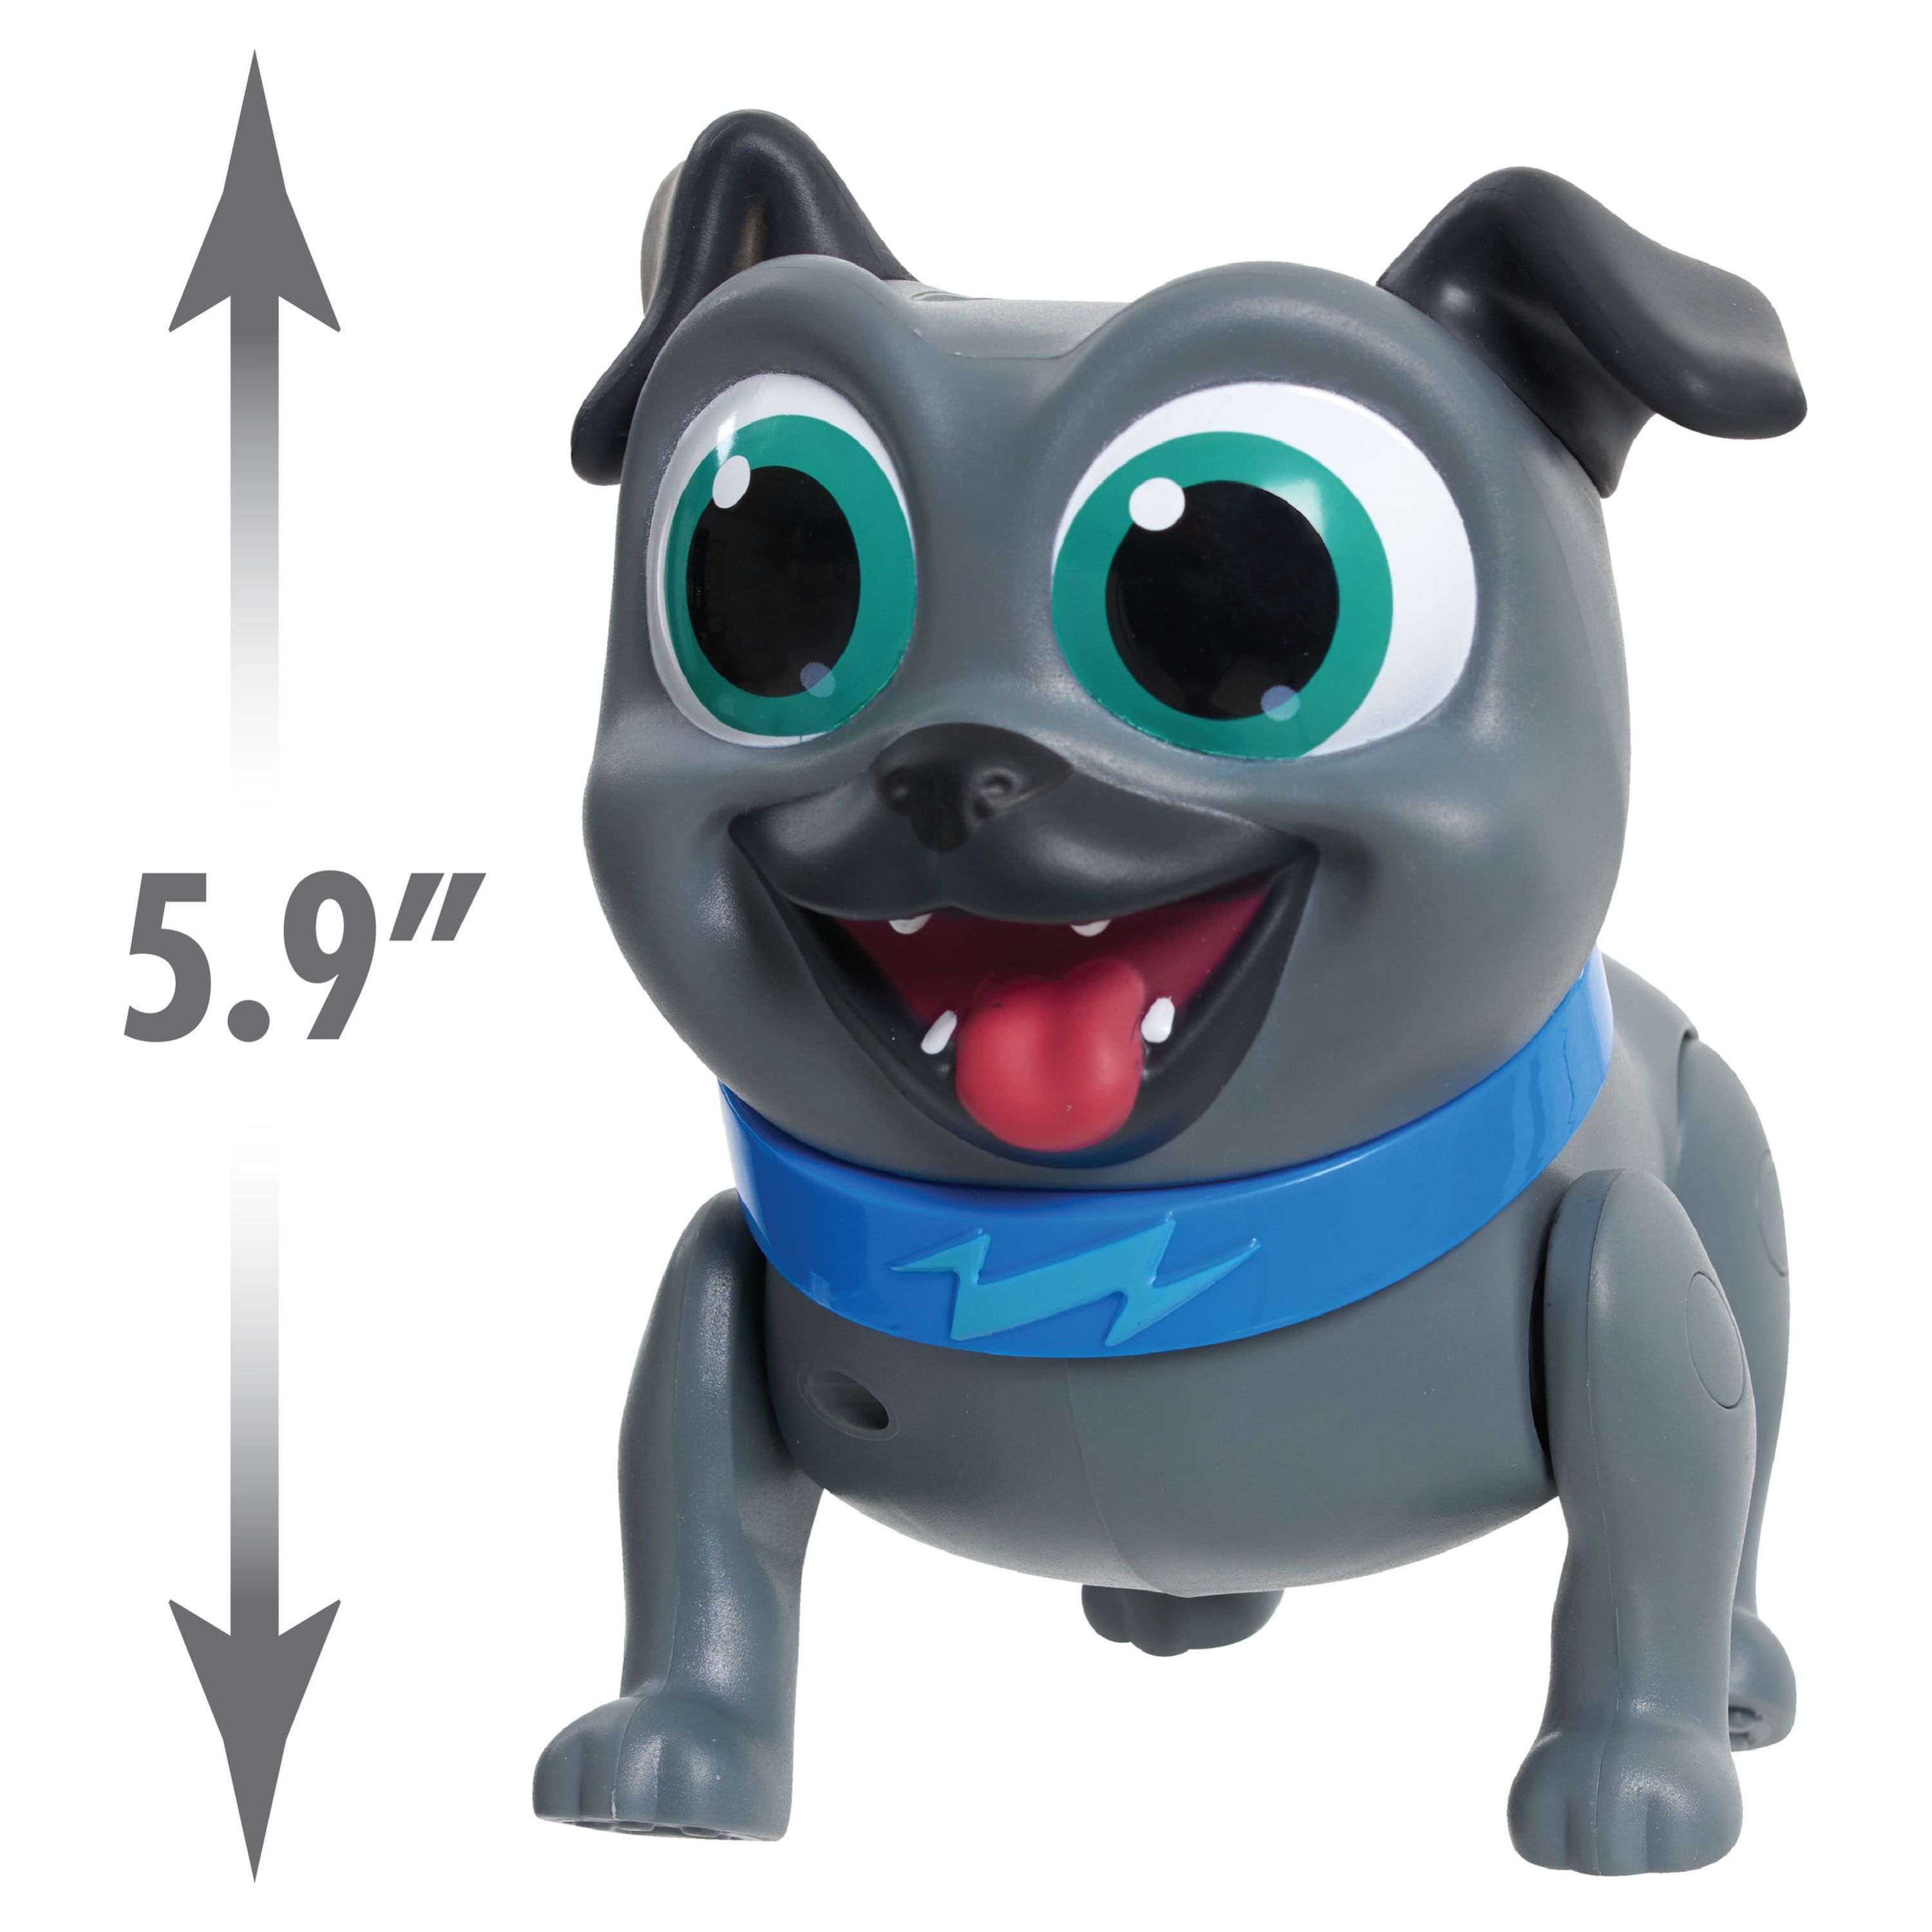 Puppy Dog Pals Surprise Action Figure, Bingo, Officially Licensed Kids Toys for Ages 3 Up, Gifts and Presents - image 4 of 6